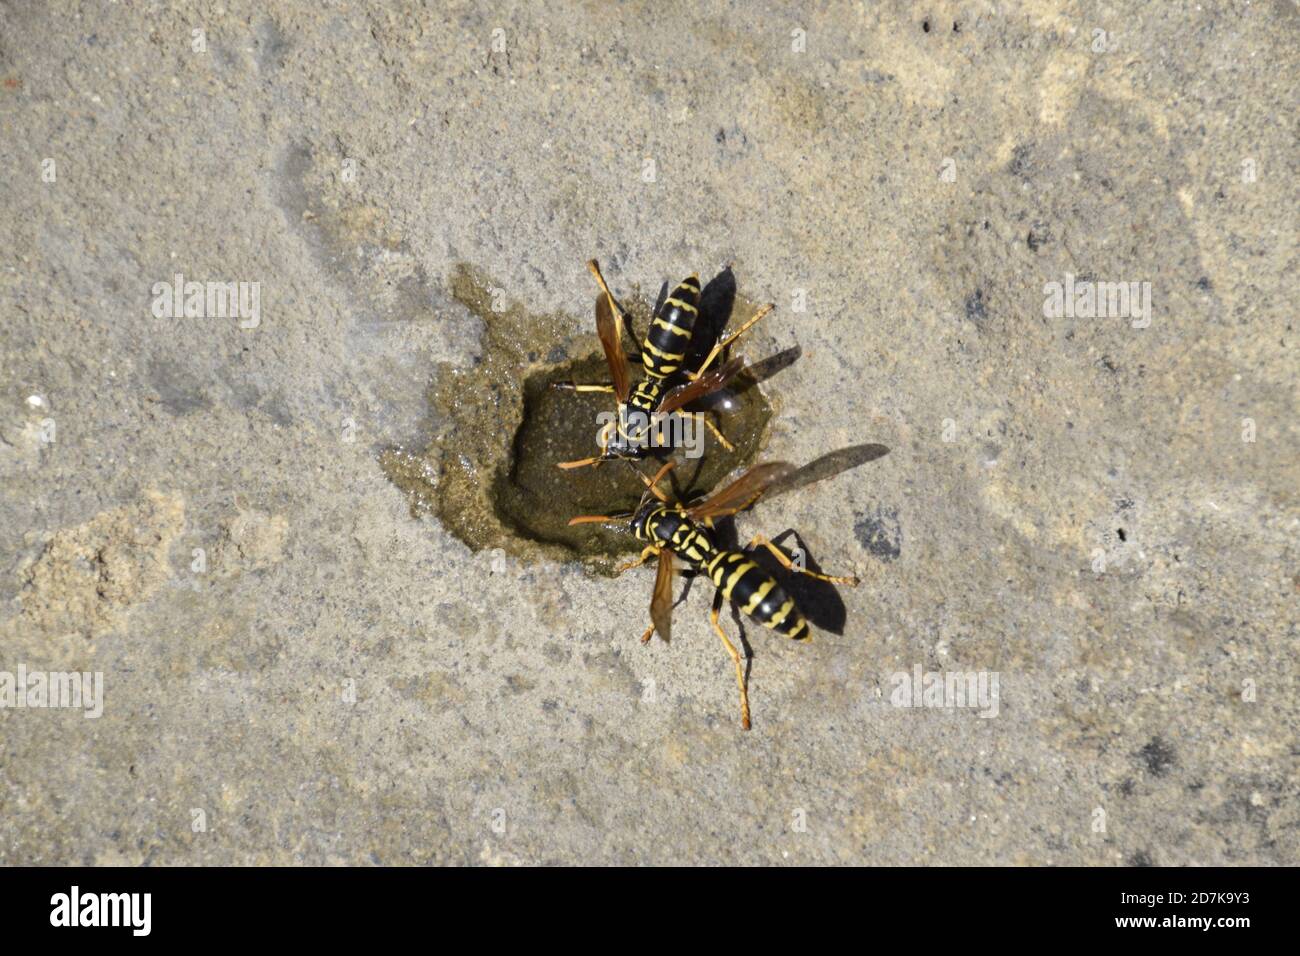 Wasps Polistes drink water. Watering in the summer heat. Stock Photo